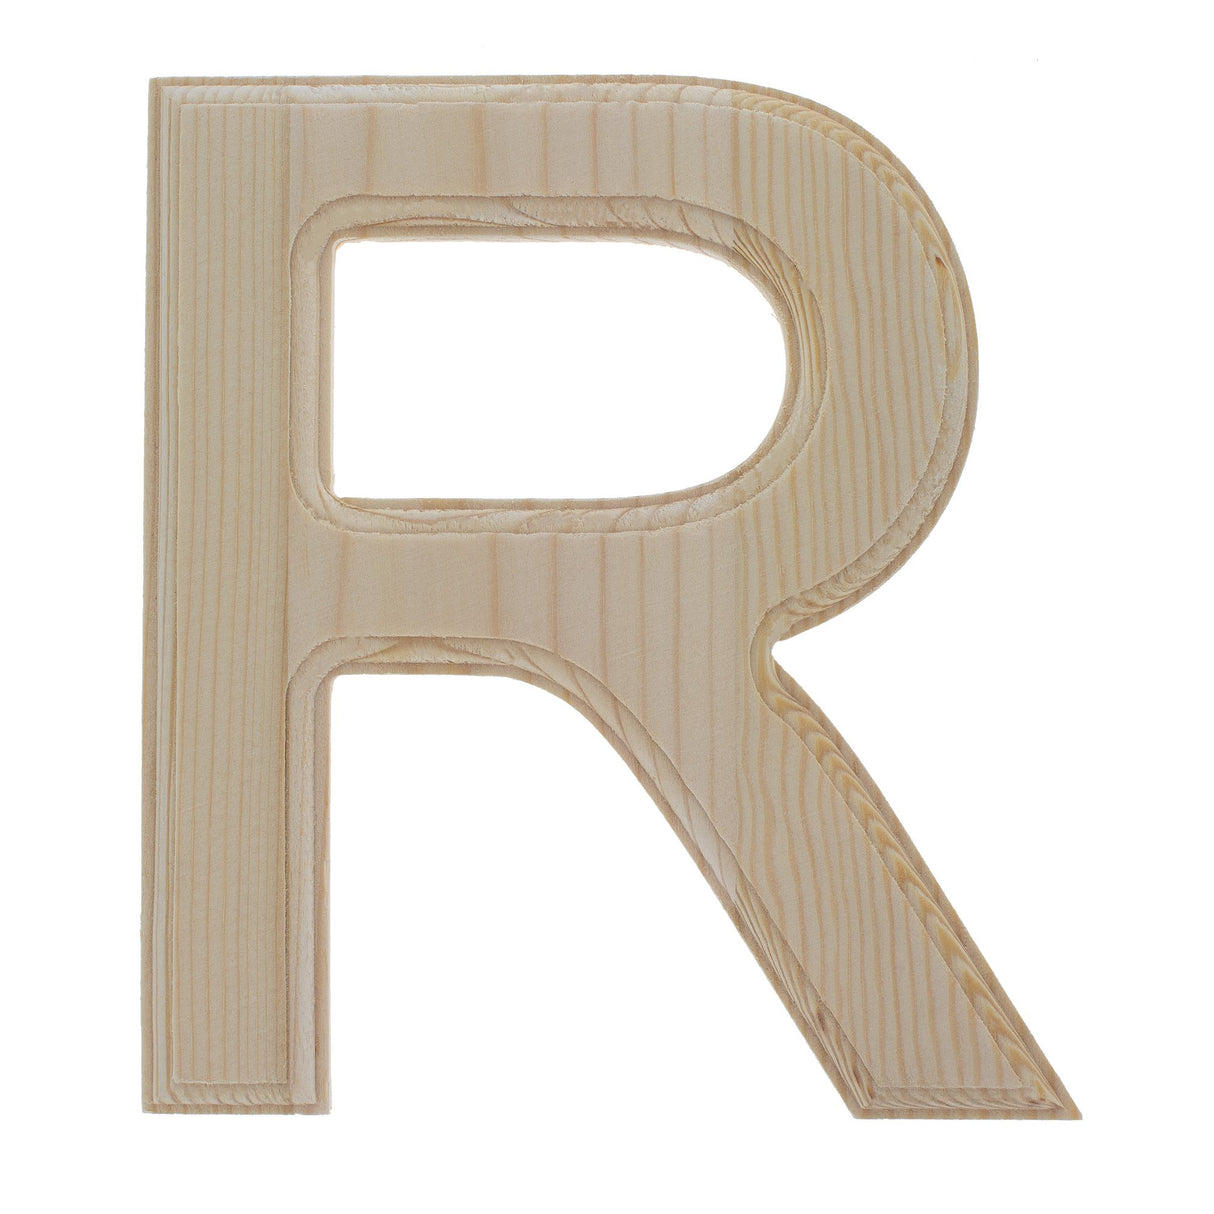 Wood Unfinished Wooden Arial Font Letter R (6.25 Inches) in Beige color